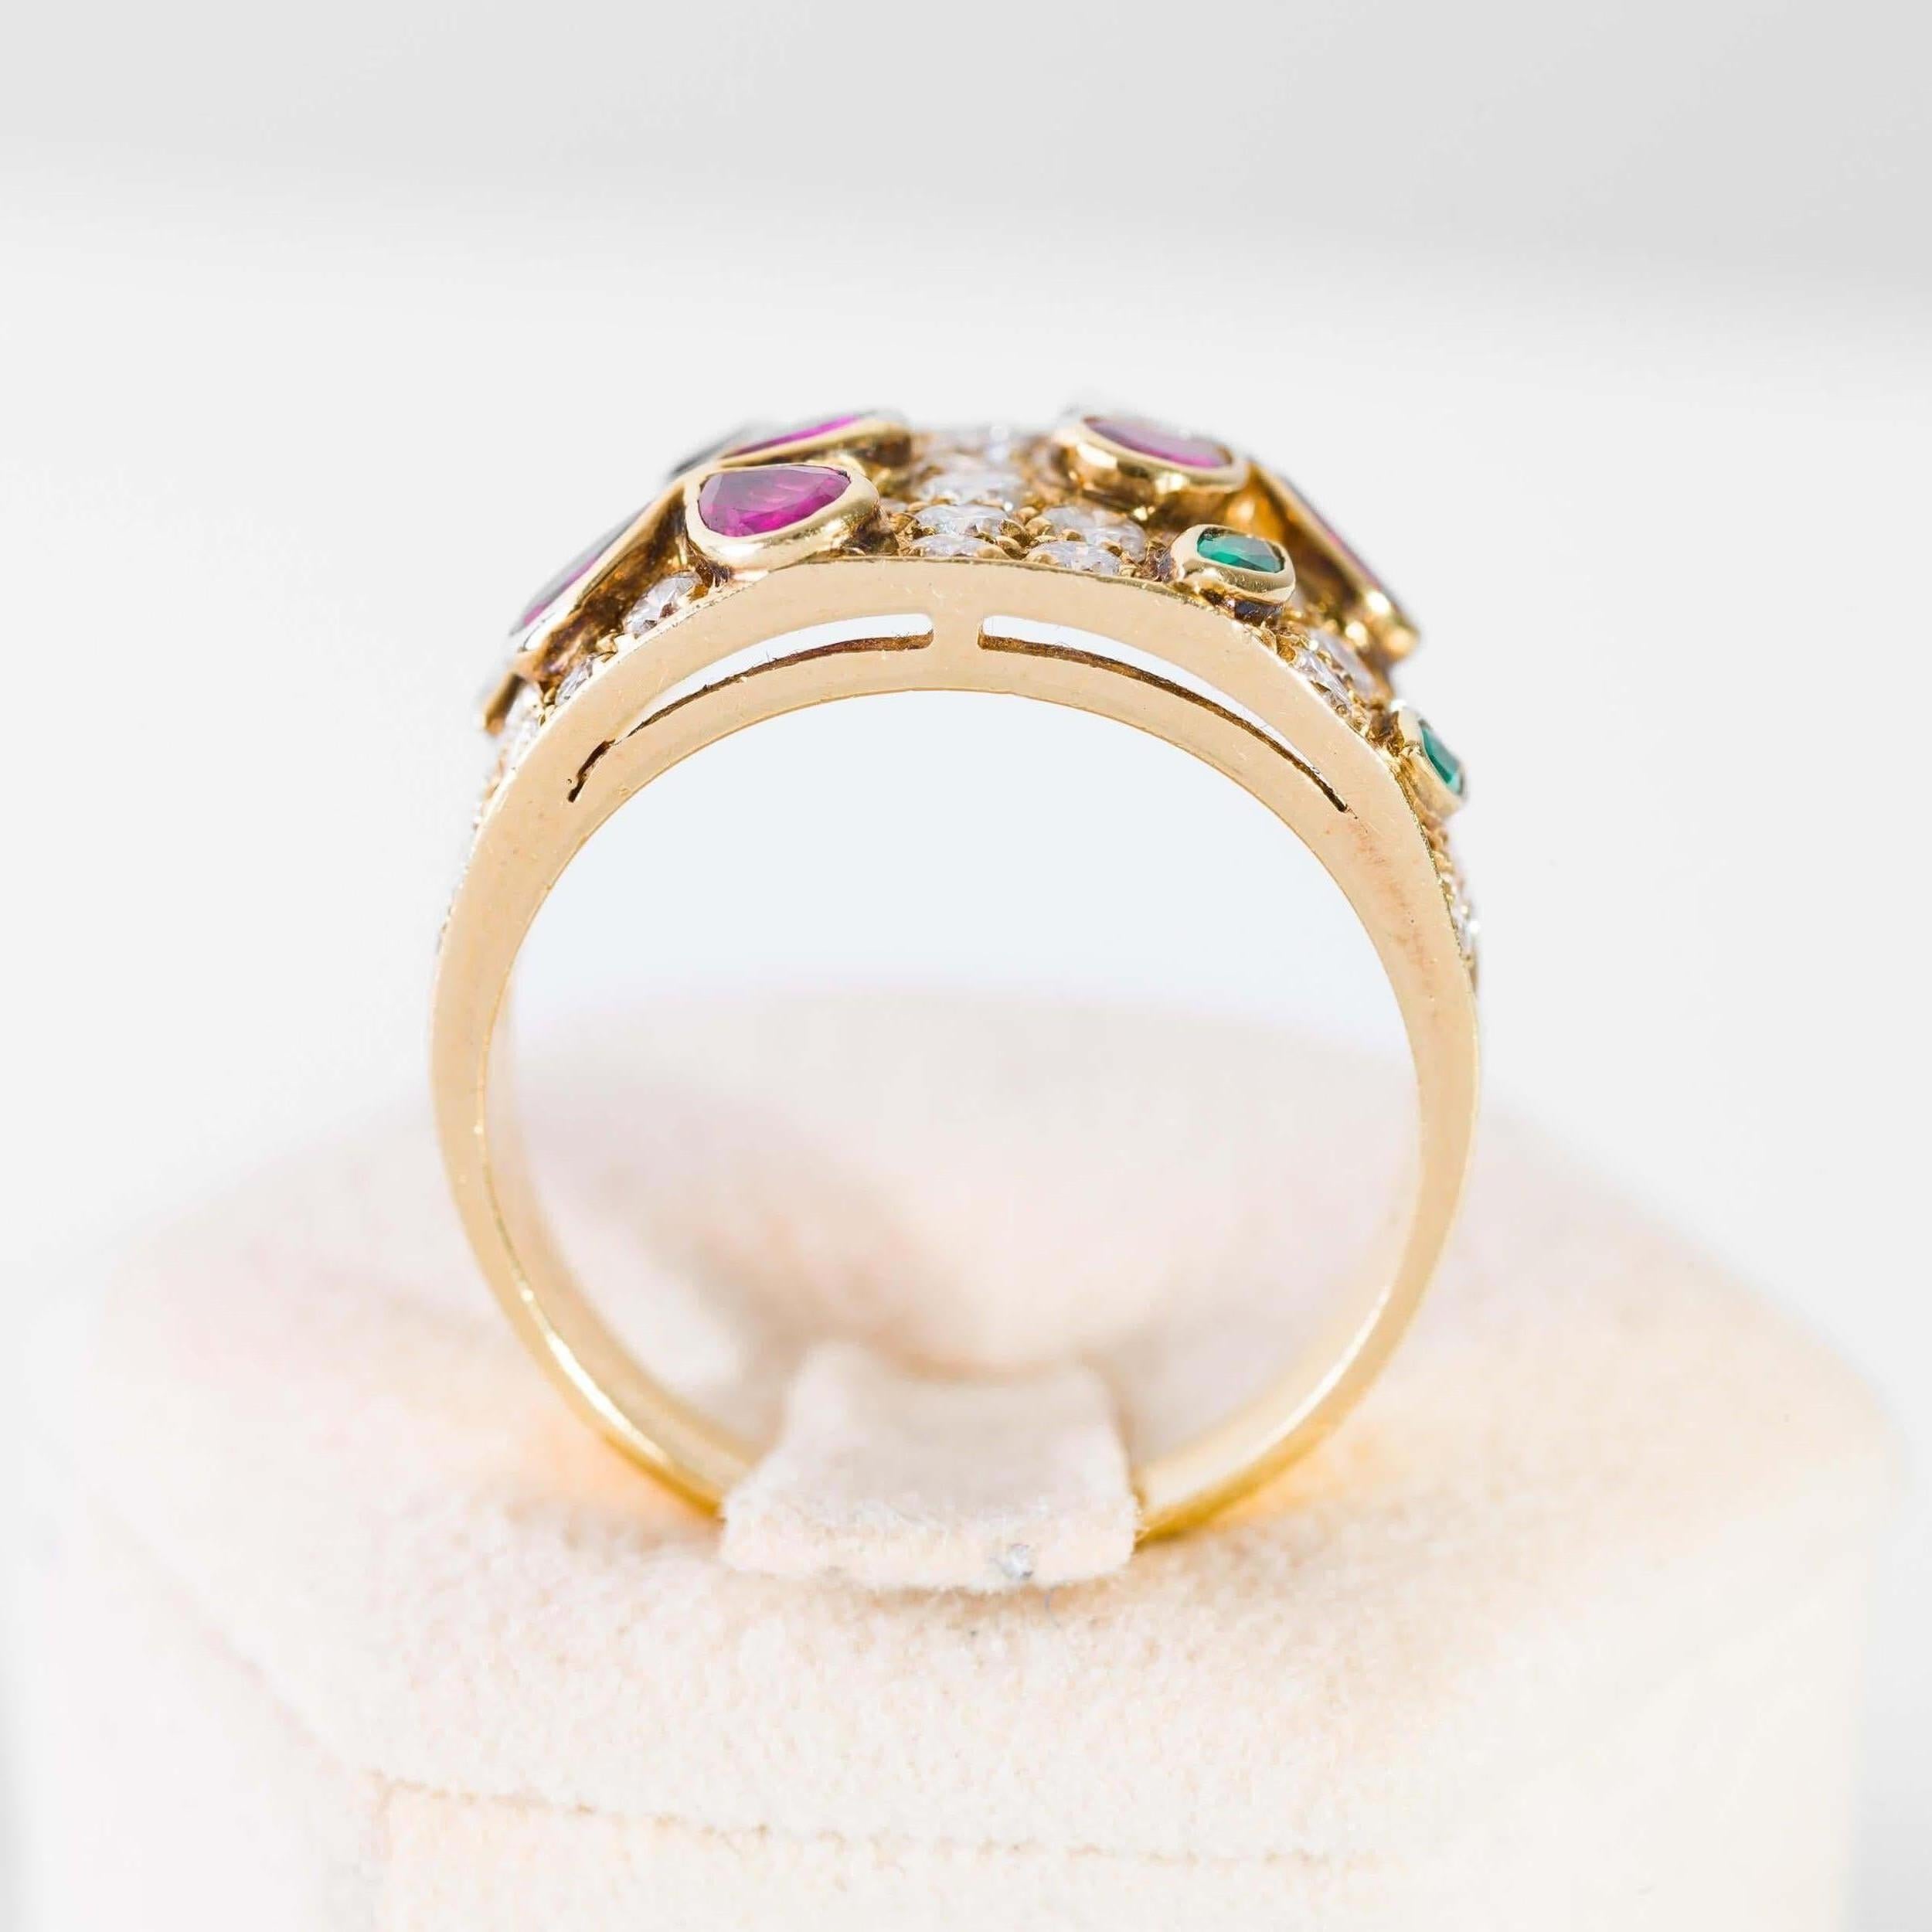 Modern Band Ring in Diamonds Yellow Gold, Drop Cut Rubies and Emeralds For Sale